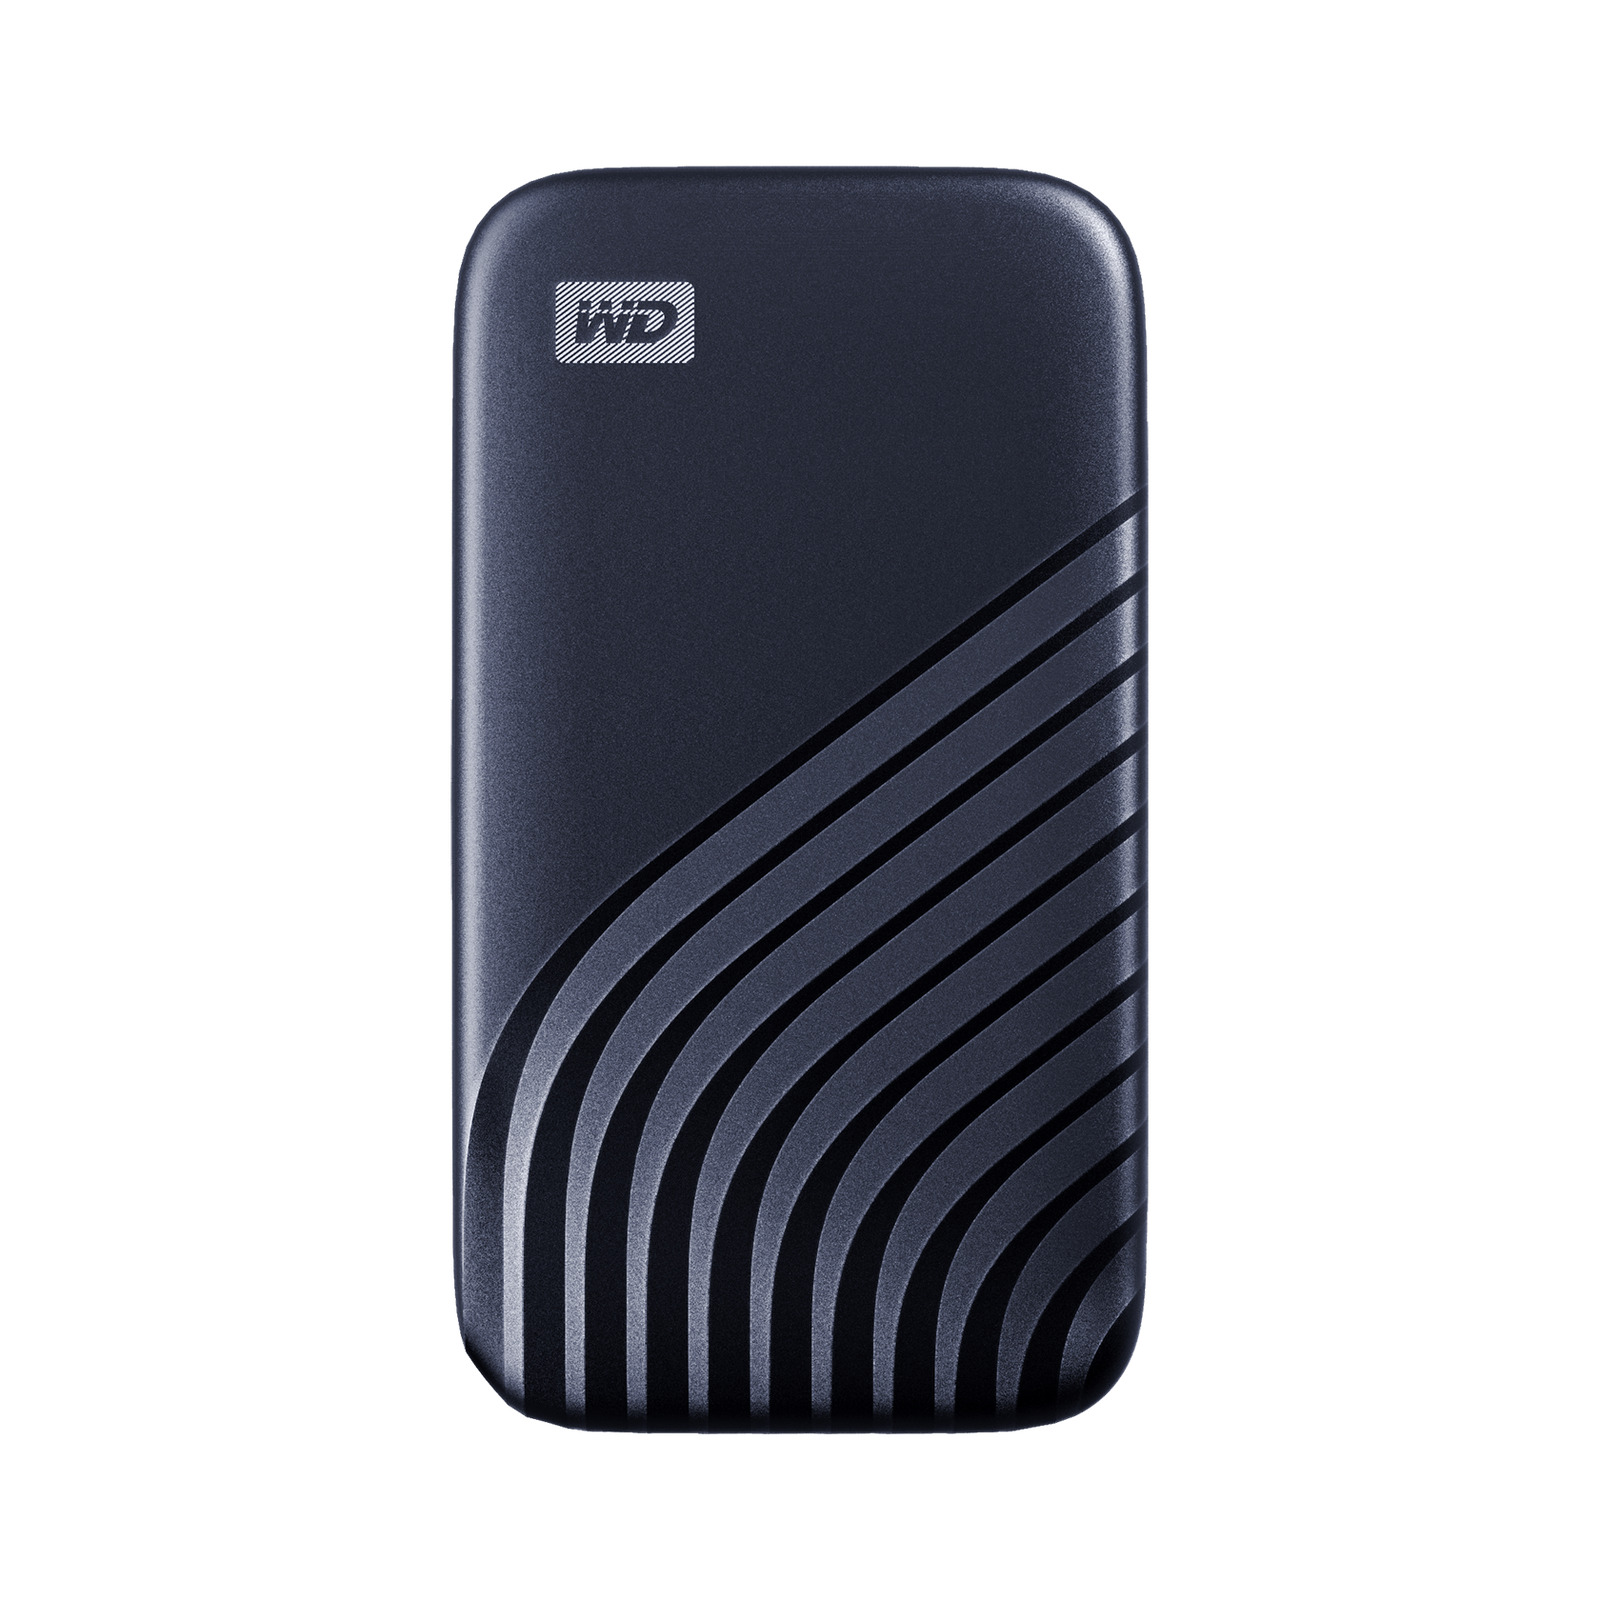 WD 1TB My Passport SSD, Portable External Solid State Drive - WDBAGF0010BBL-WESN